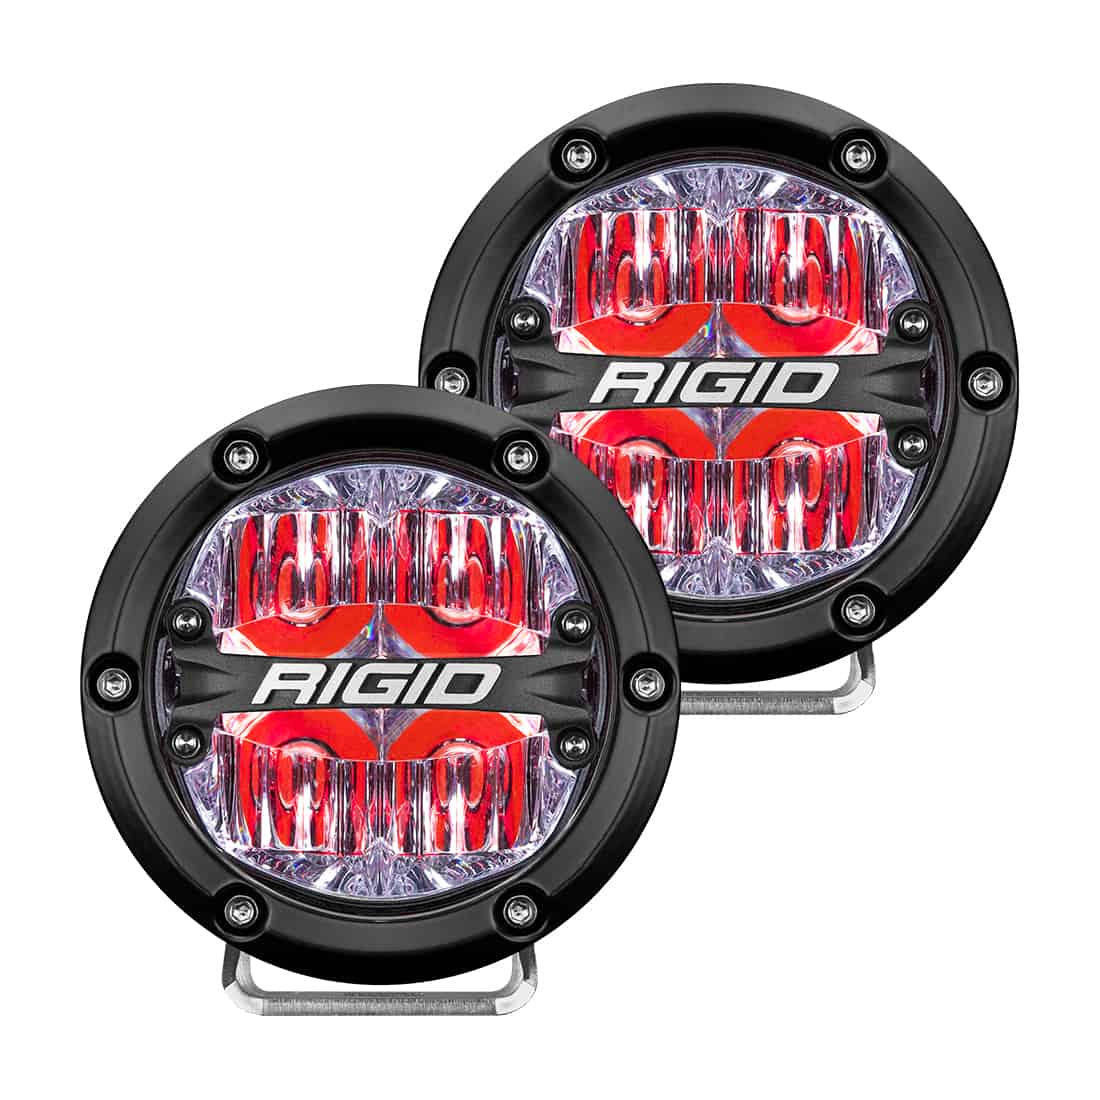 360-Series 4 Inch Led Off-Road Drive Beam Red Backlight Pair RIGID Lighting 36116